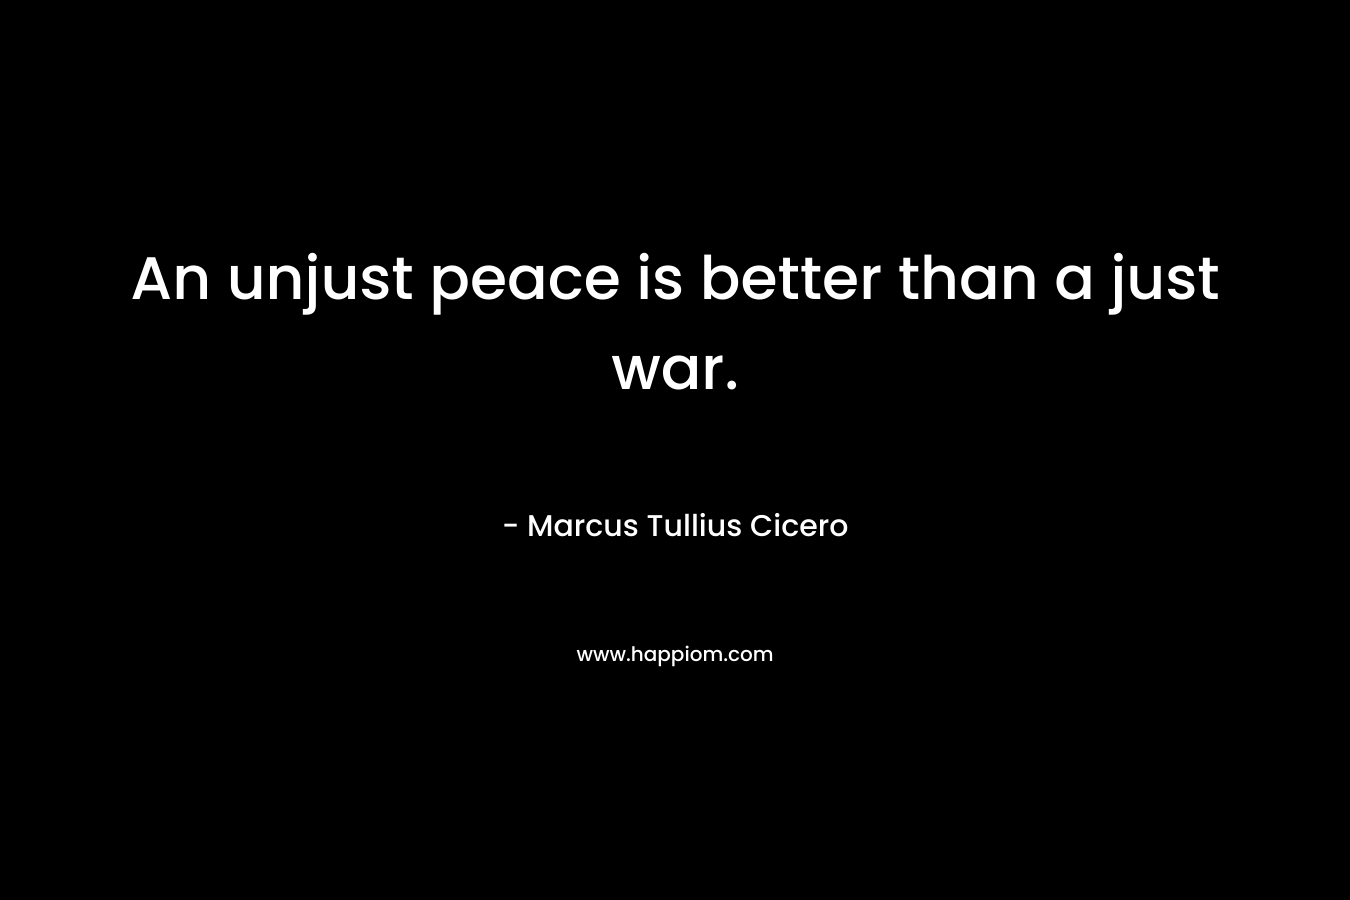 An unjust peace is better than a just war. – Marcus Tullius Cicero